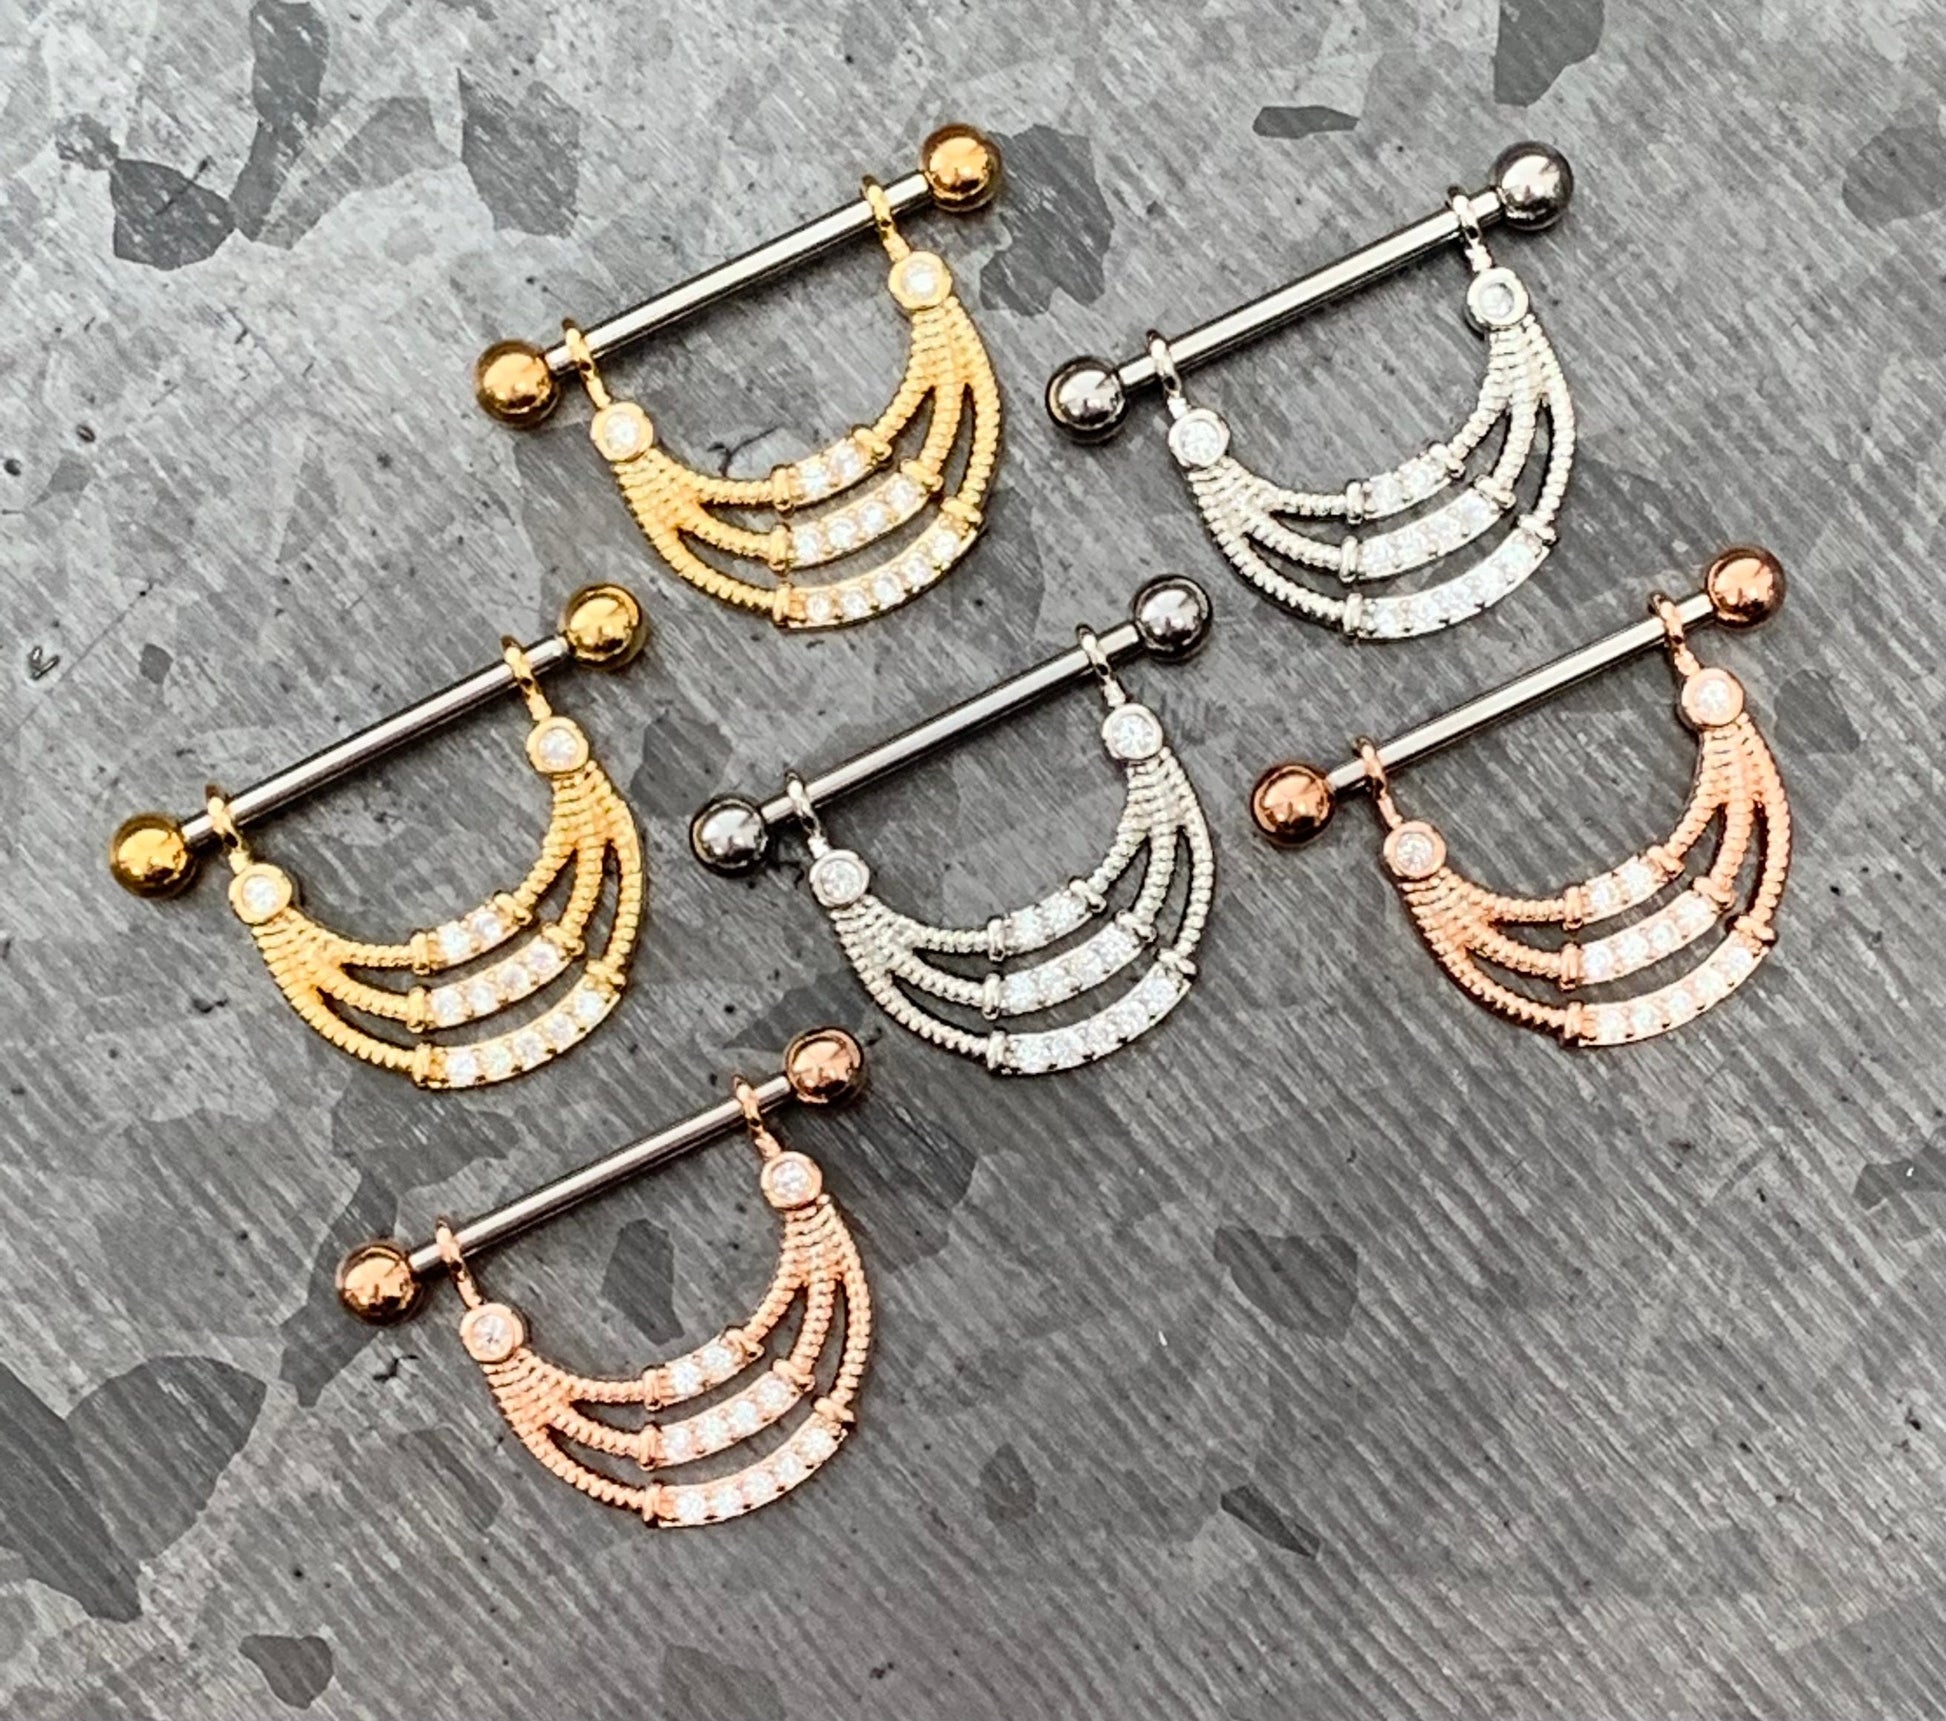 PAIR of Stunning Triple Lined CZ Gem Steel Nipple Barbells/Shields/Rings - 14g, 14mm wearable length in Silver, Gold & Rose Gold!